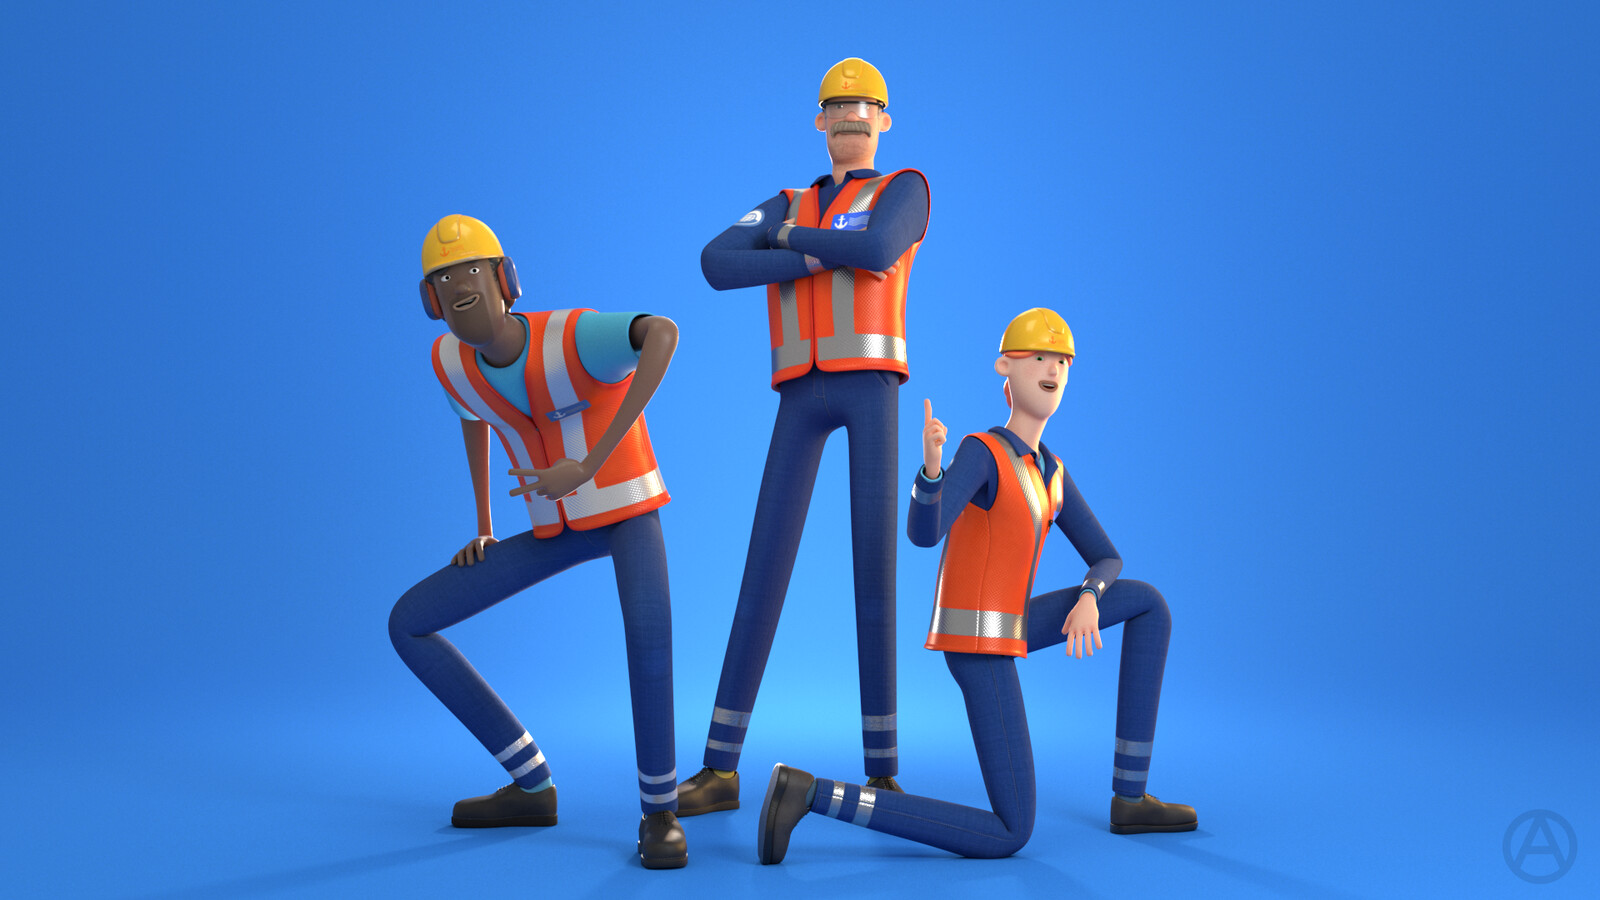 Port Workers Gang
(left guy not textured by me)